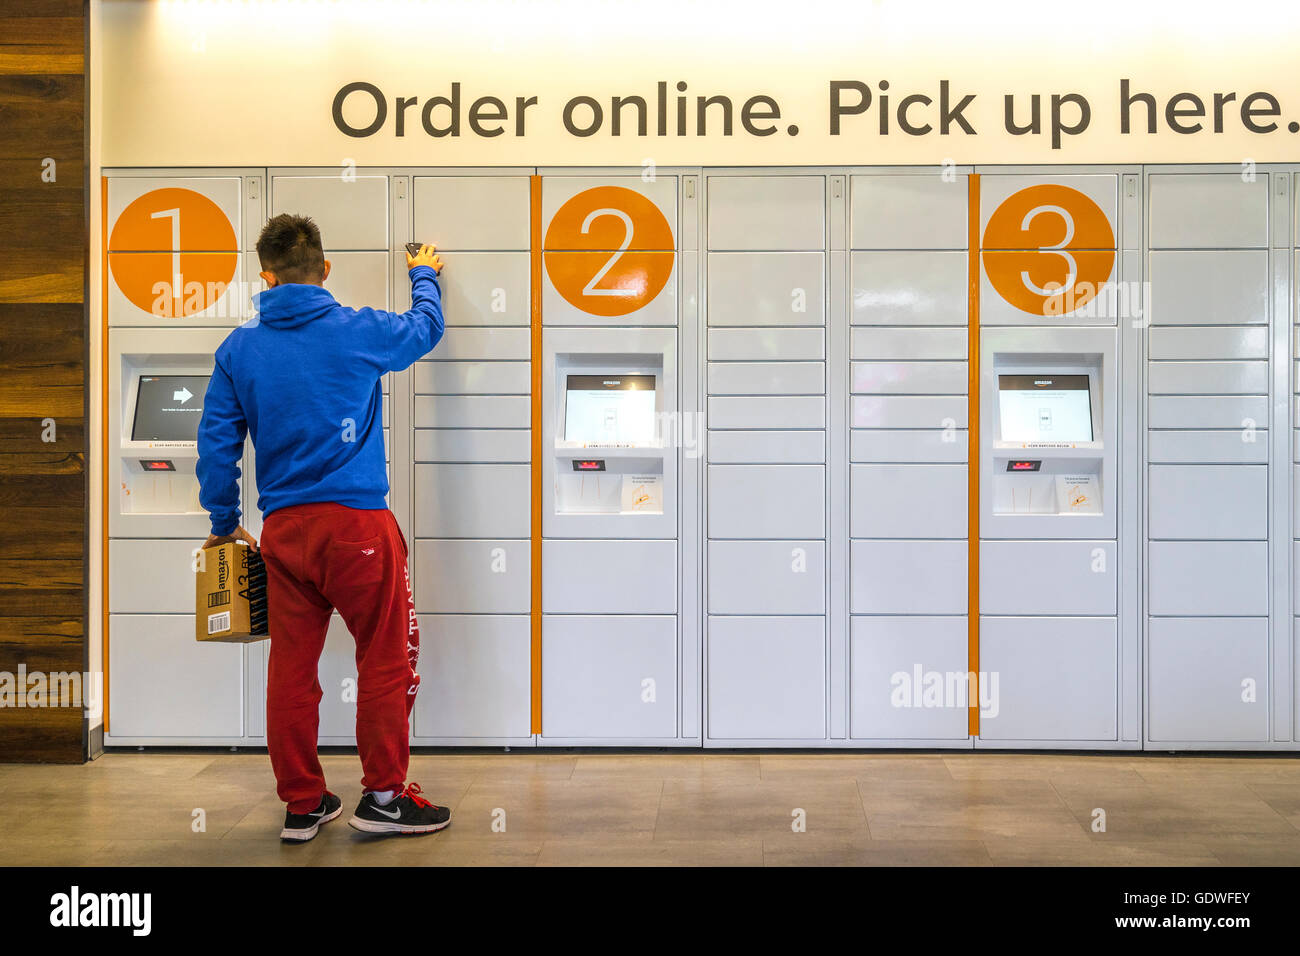 Man closing an ecommerce locker after picking up a package he ordered online Stock Photo